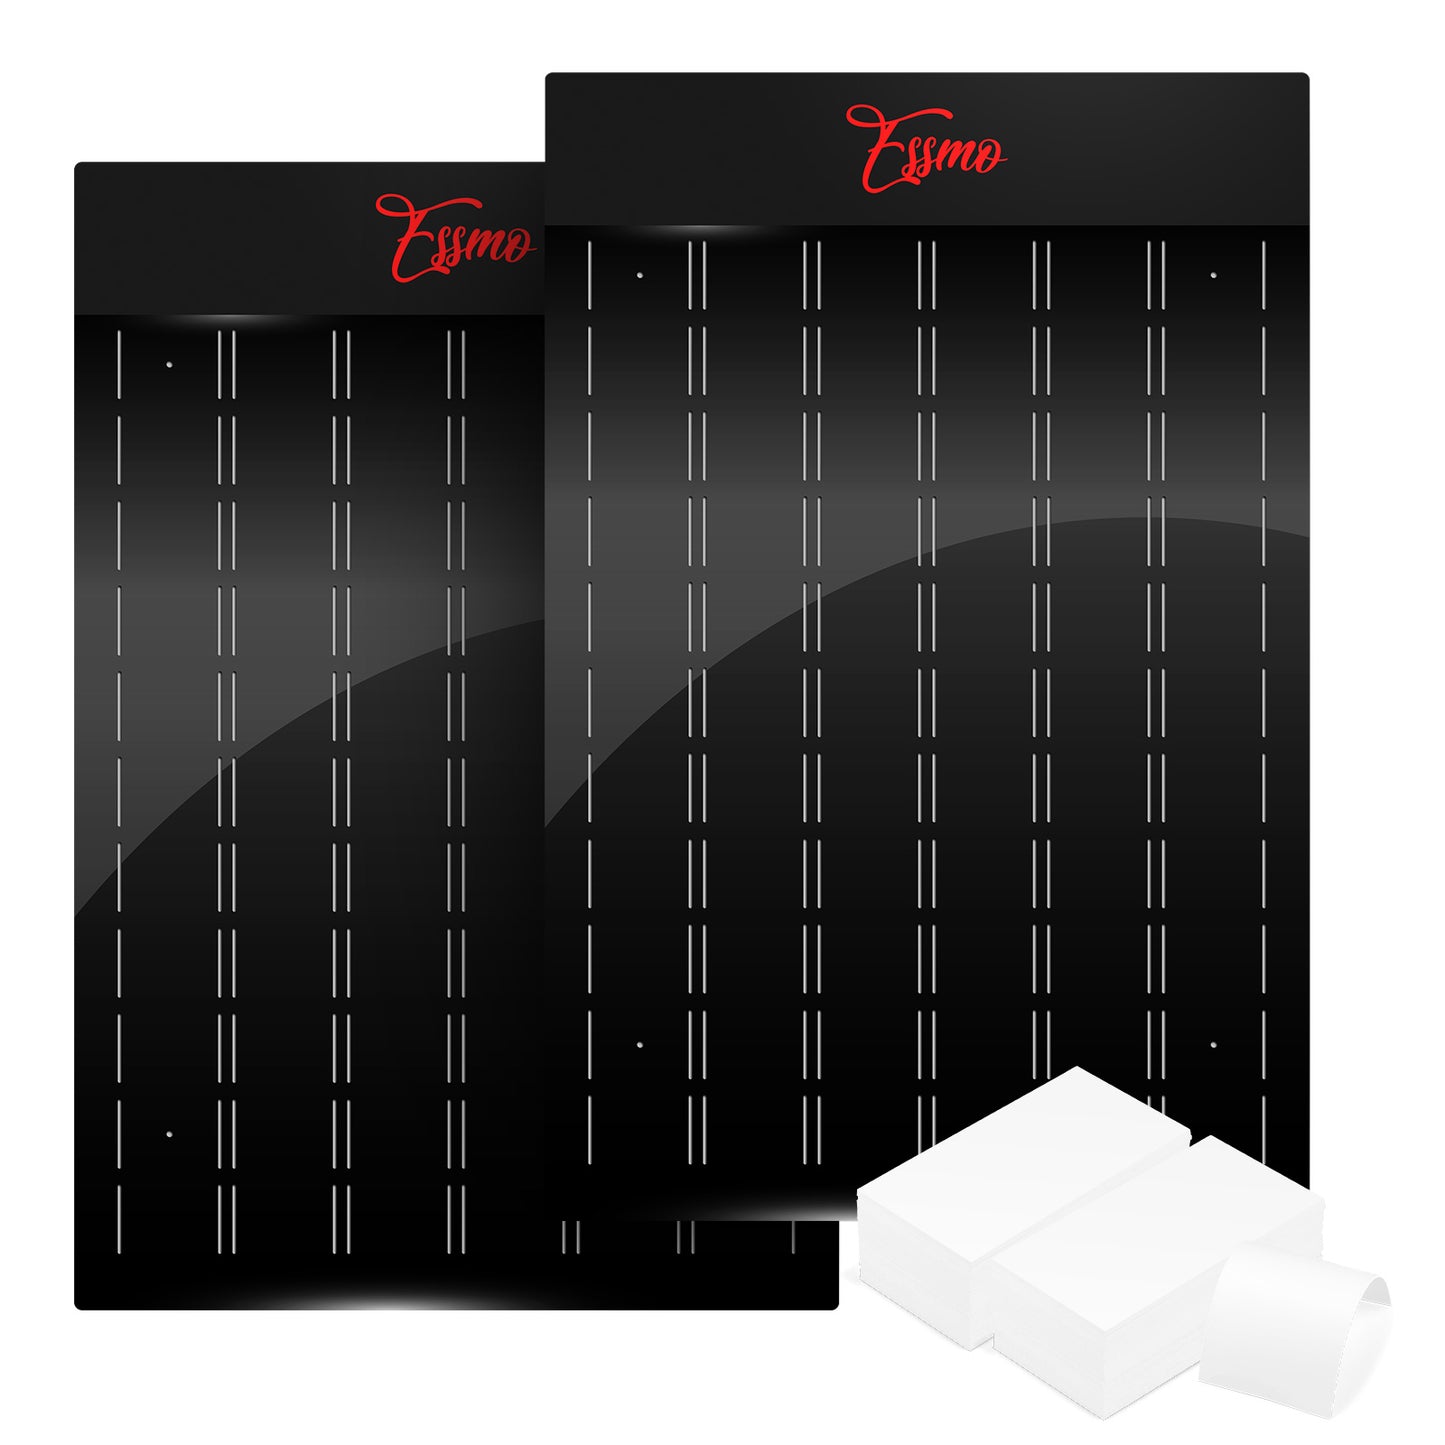 Display Board For Auto Vinyl Wrap Decal Sticker Application Show